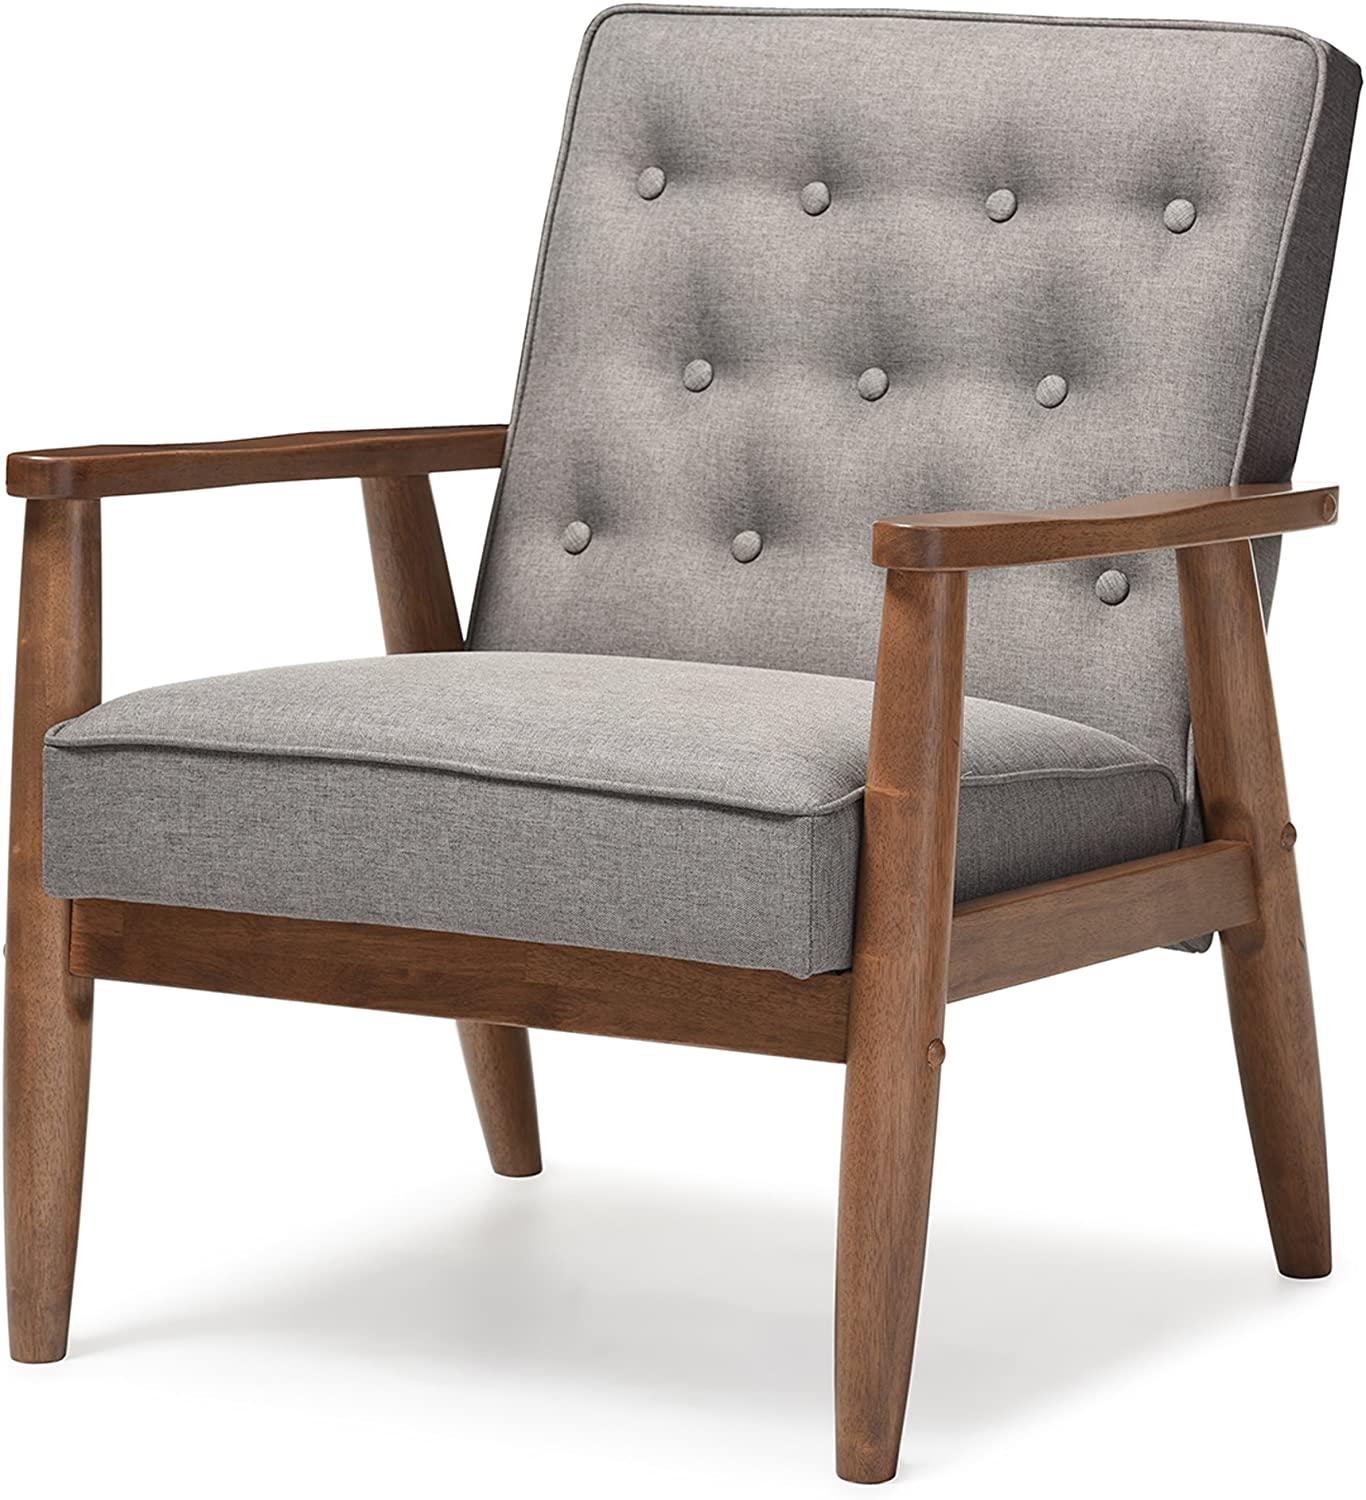 Baxton Studio Mid-Century Modern Upholstered Wooden Lounge Accent Chair